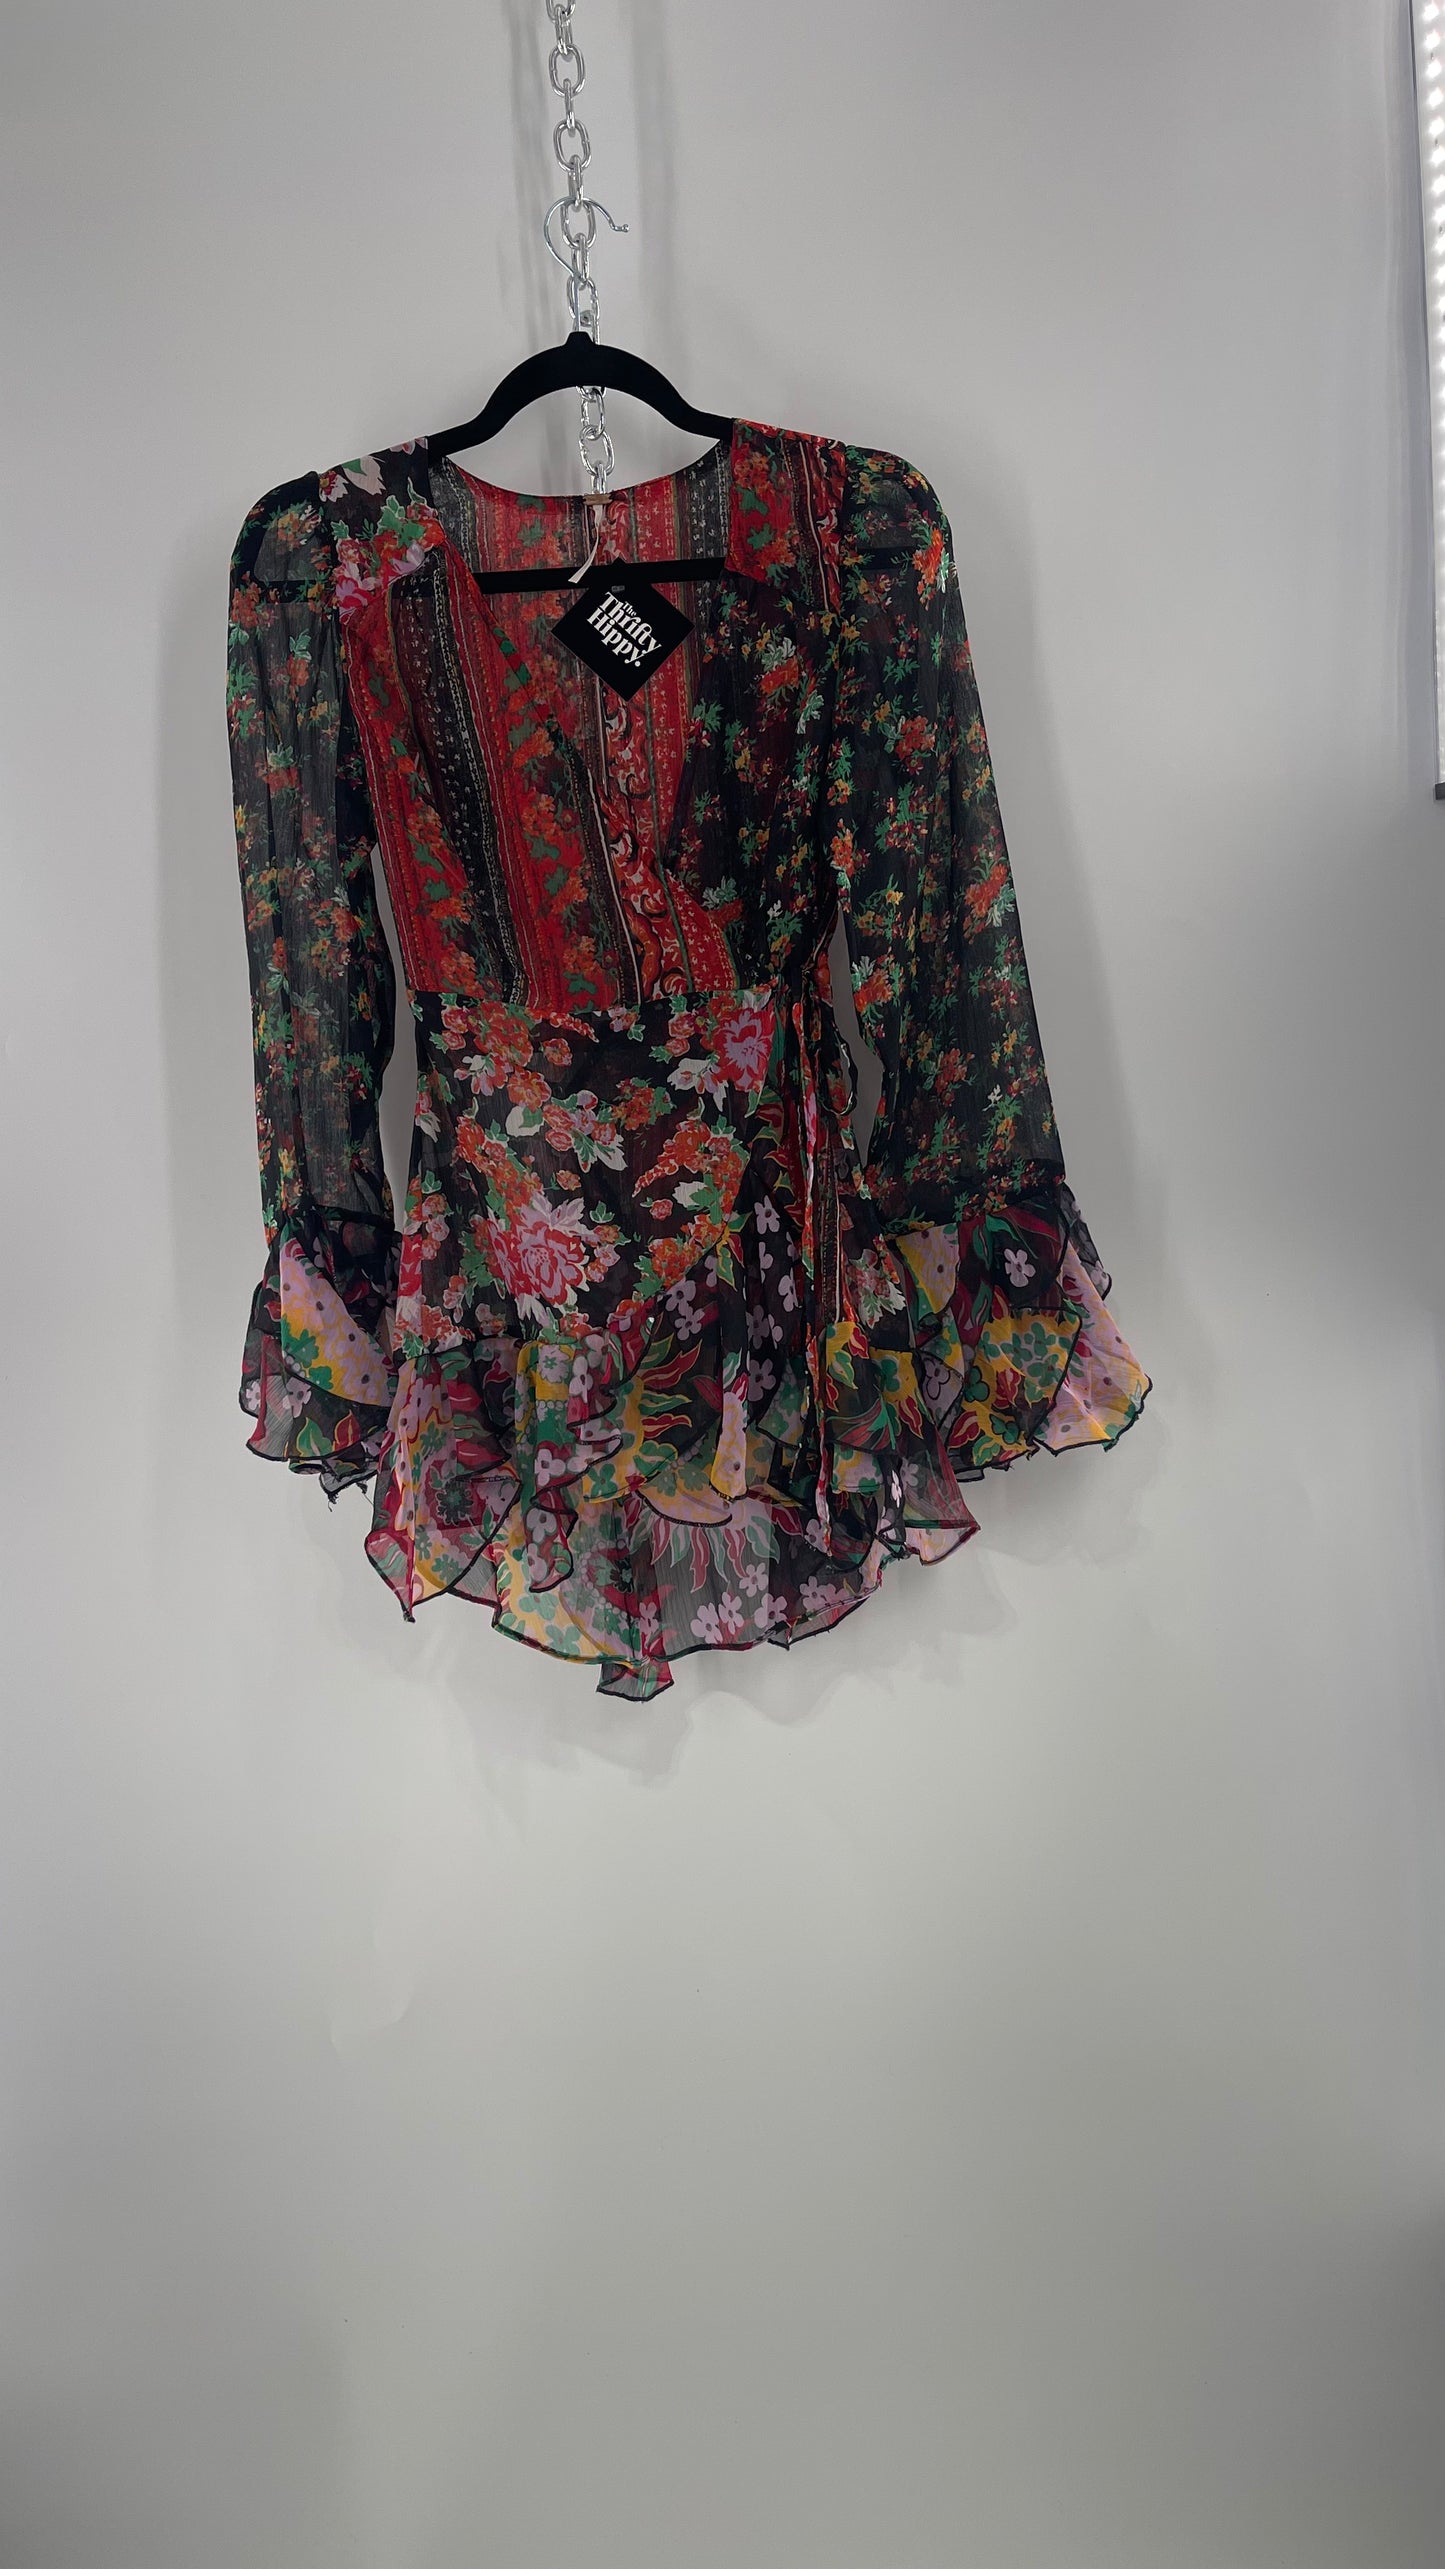 Free People Black Colorful Floral Tie Front Blouse with Ruffled Sleeves and Hem(XS)